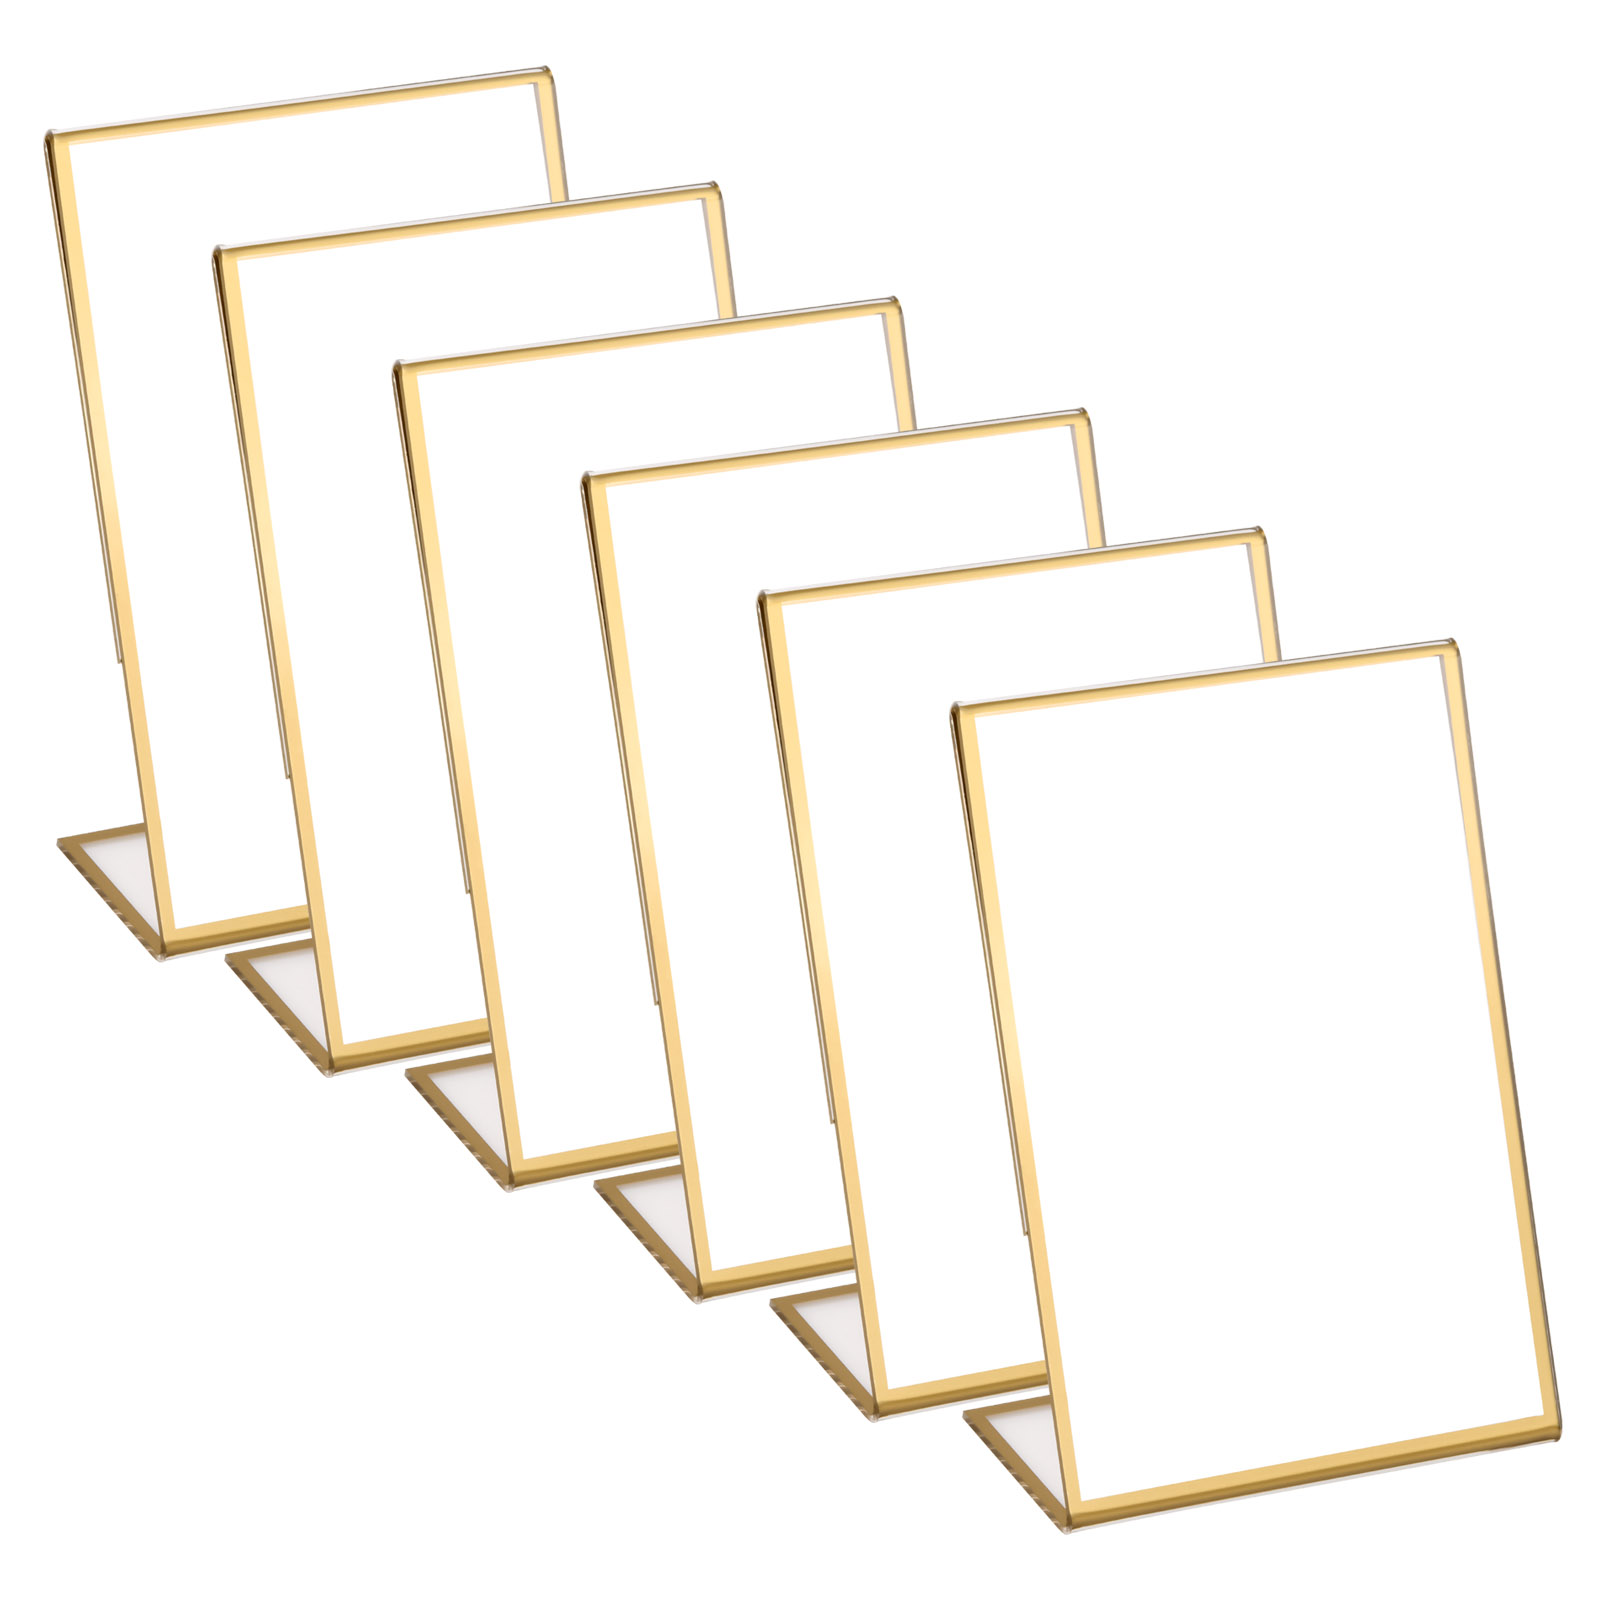 Double Sided Pedestal Picture Frames for 4x6 Inch Photos (White, 10 Pack)